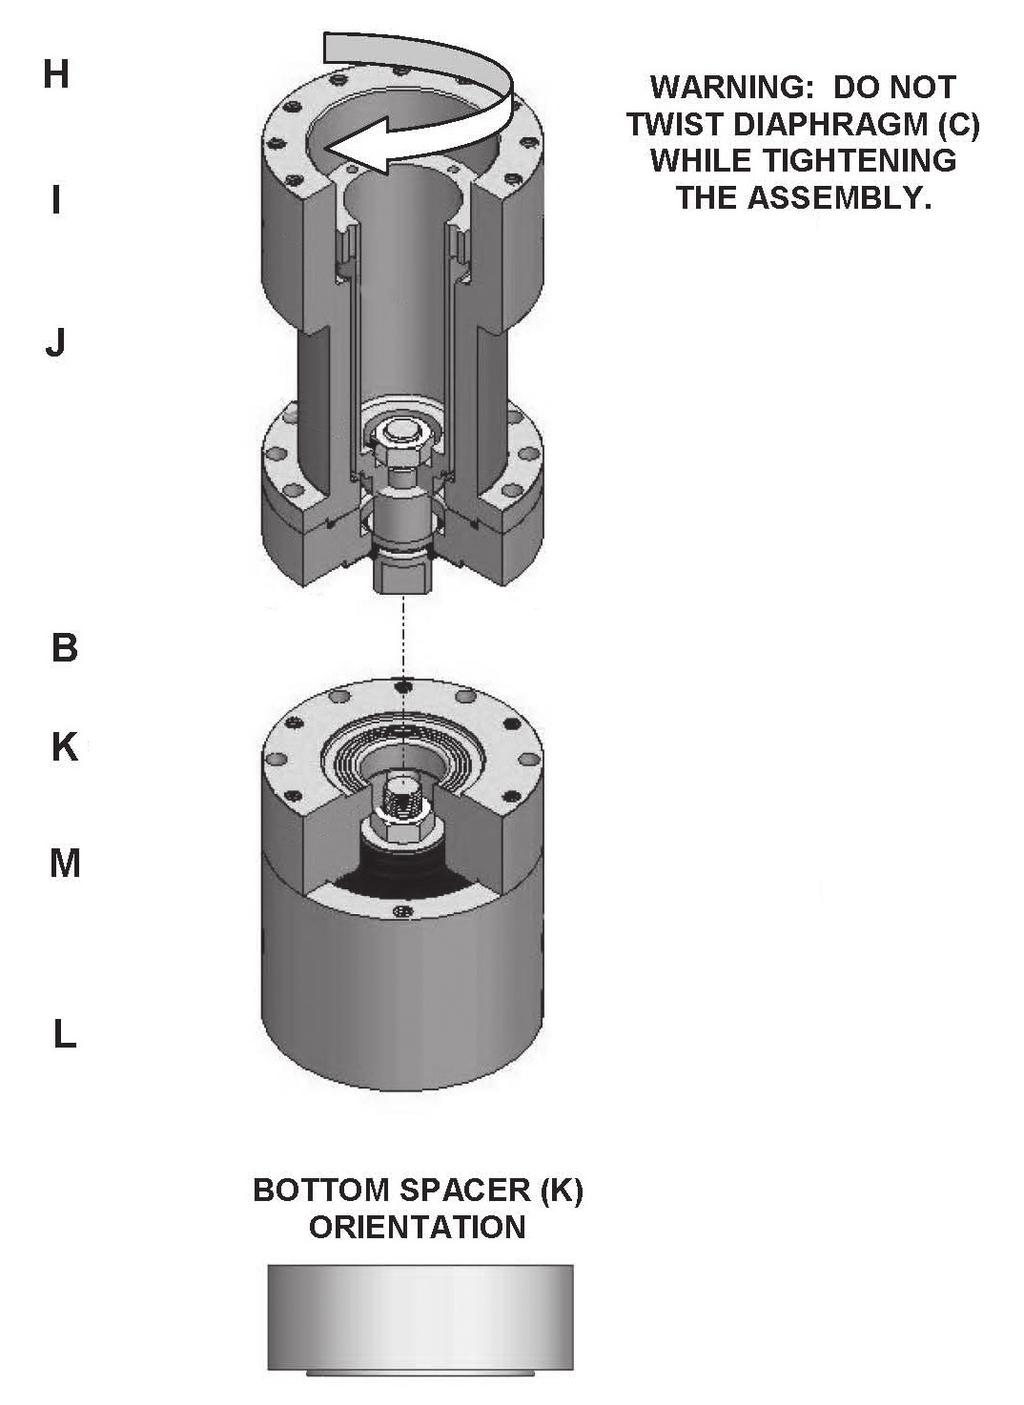 Connecting the Two Pistons 1000/1500-CH Bottom Spacer Assembly Orient the bottom spacer (K) onto the top body assembly (L). Place the adapter block assembly onto the bottom spacer (K).